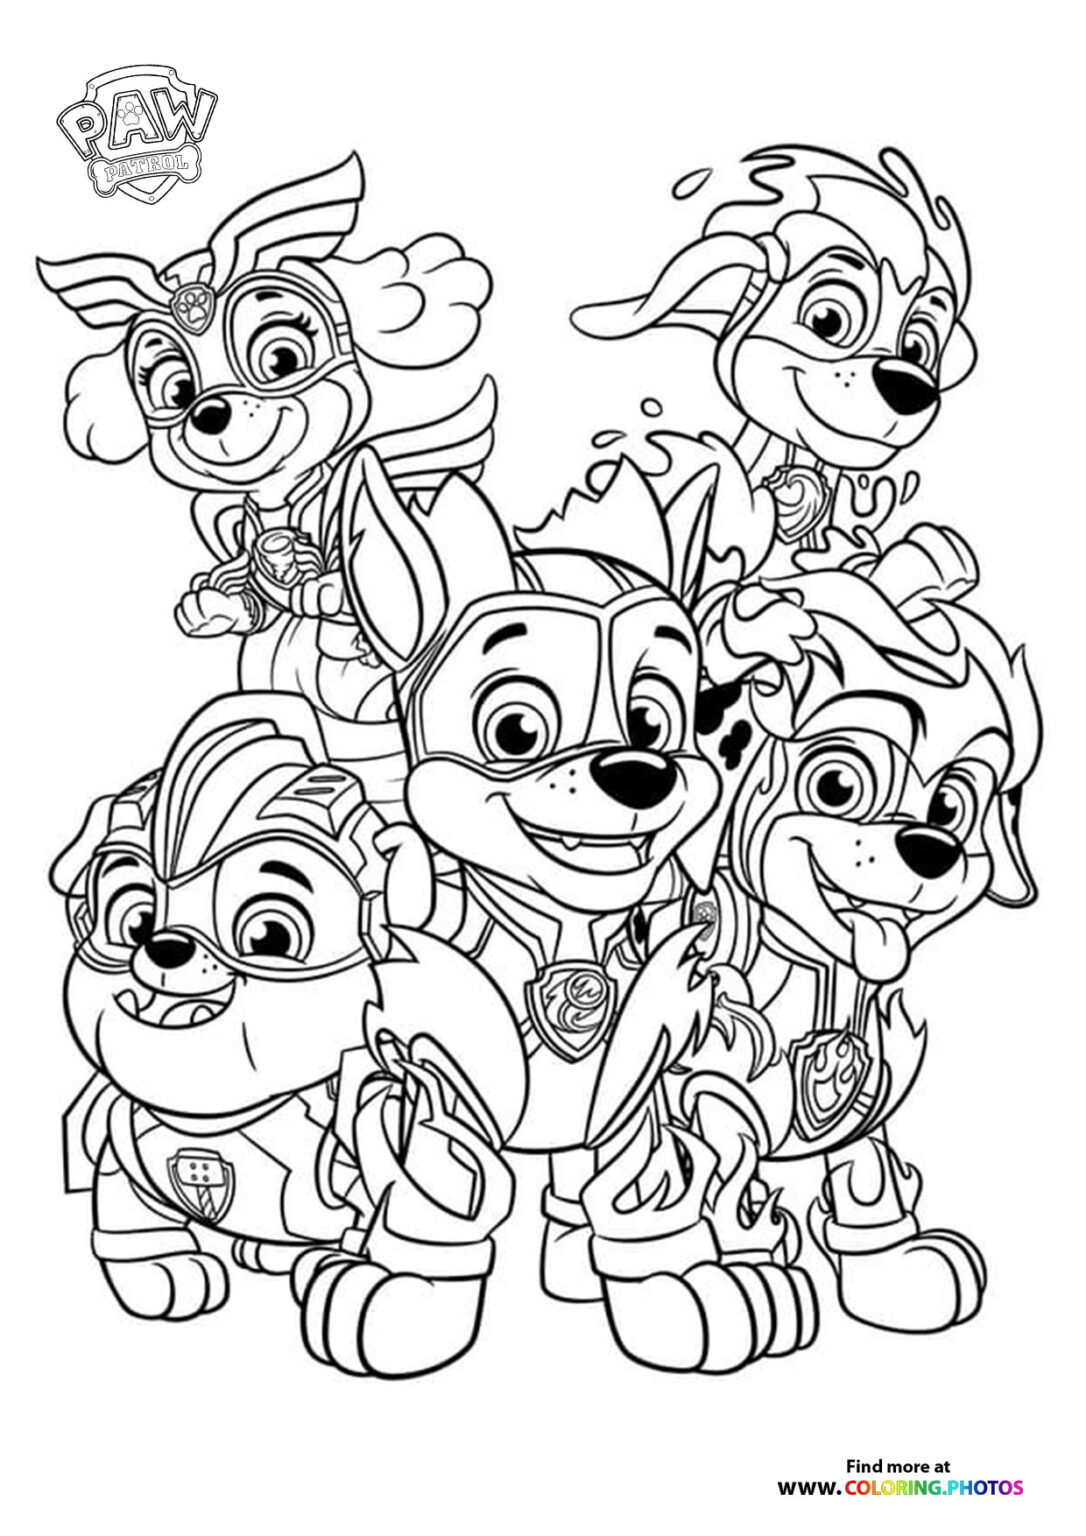 paw-patrol-the-movie-coloring-pages-for-kids-free-print-or-download